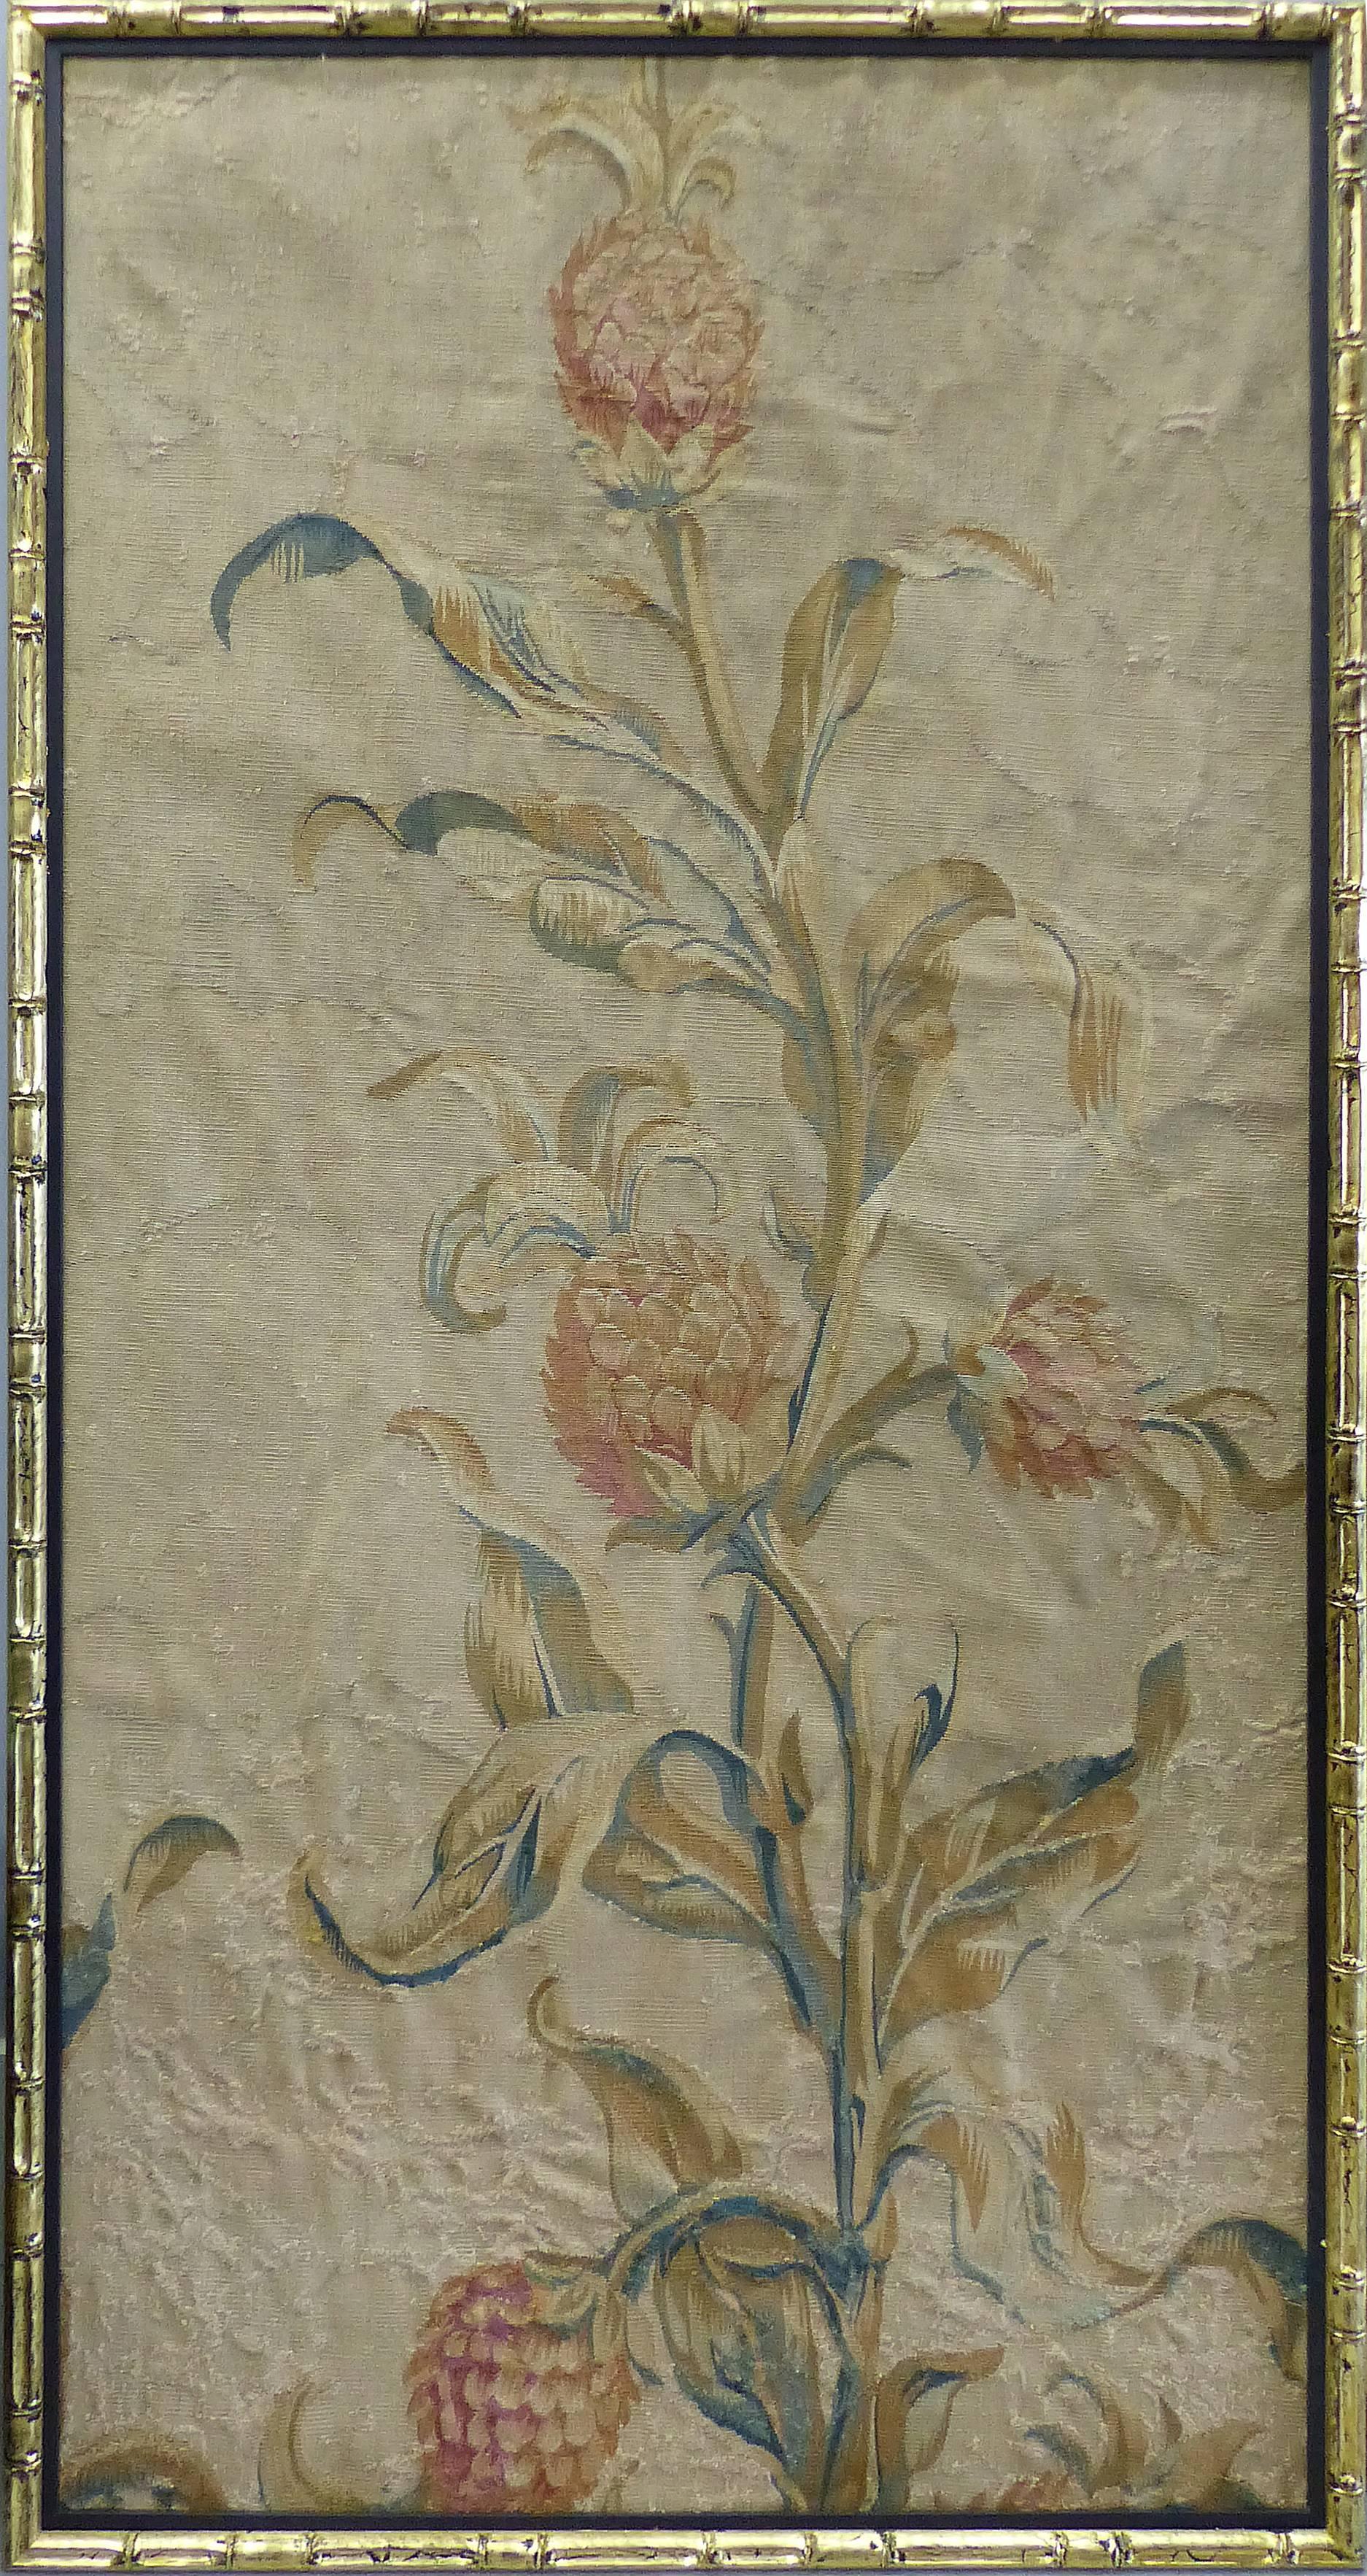 18th Century Floral Aubusson Panels, Set of Three

A triptych of three 18th century European Aubusson floral panel tapestries typically referred to as portaniers. The panels relate and compliment one another with graceful floral designs. Displayed